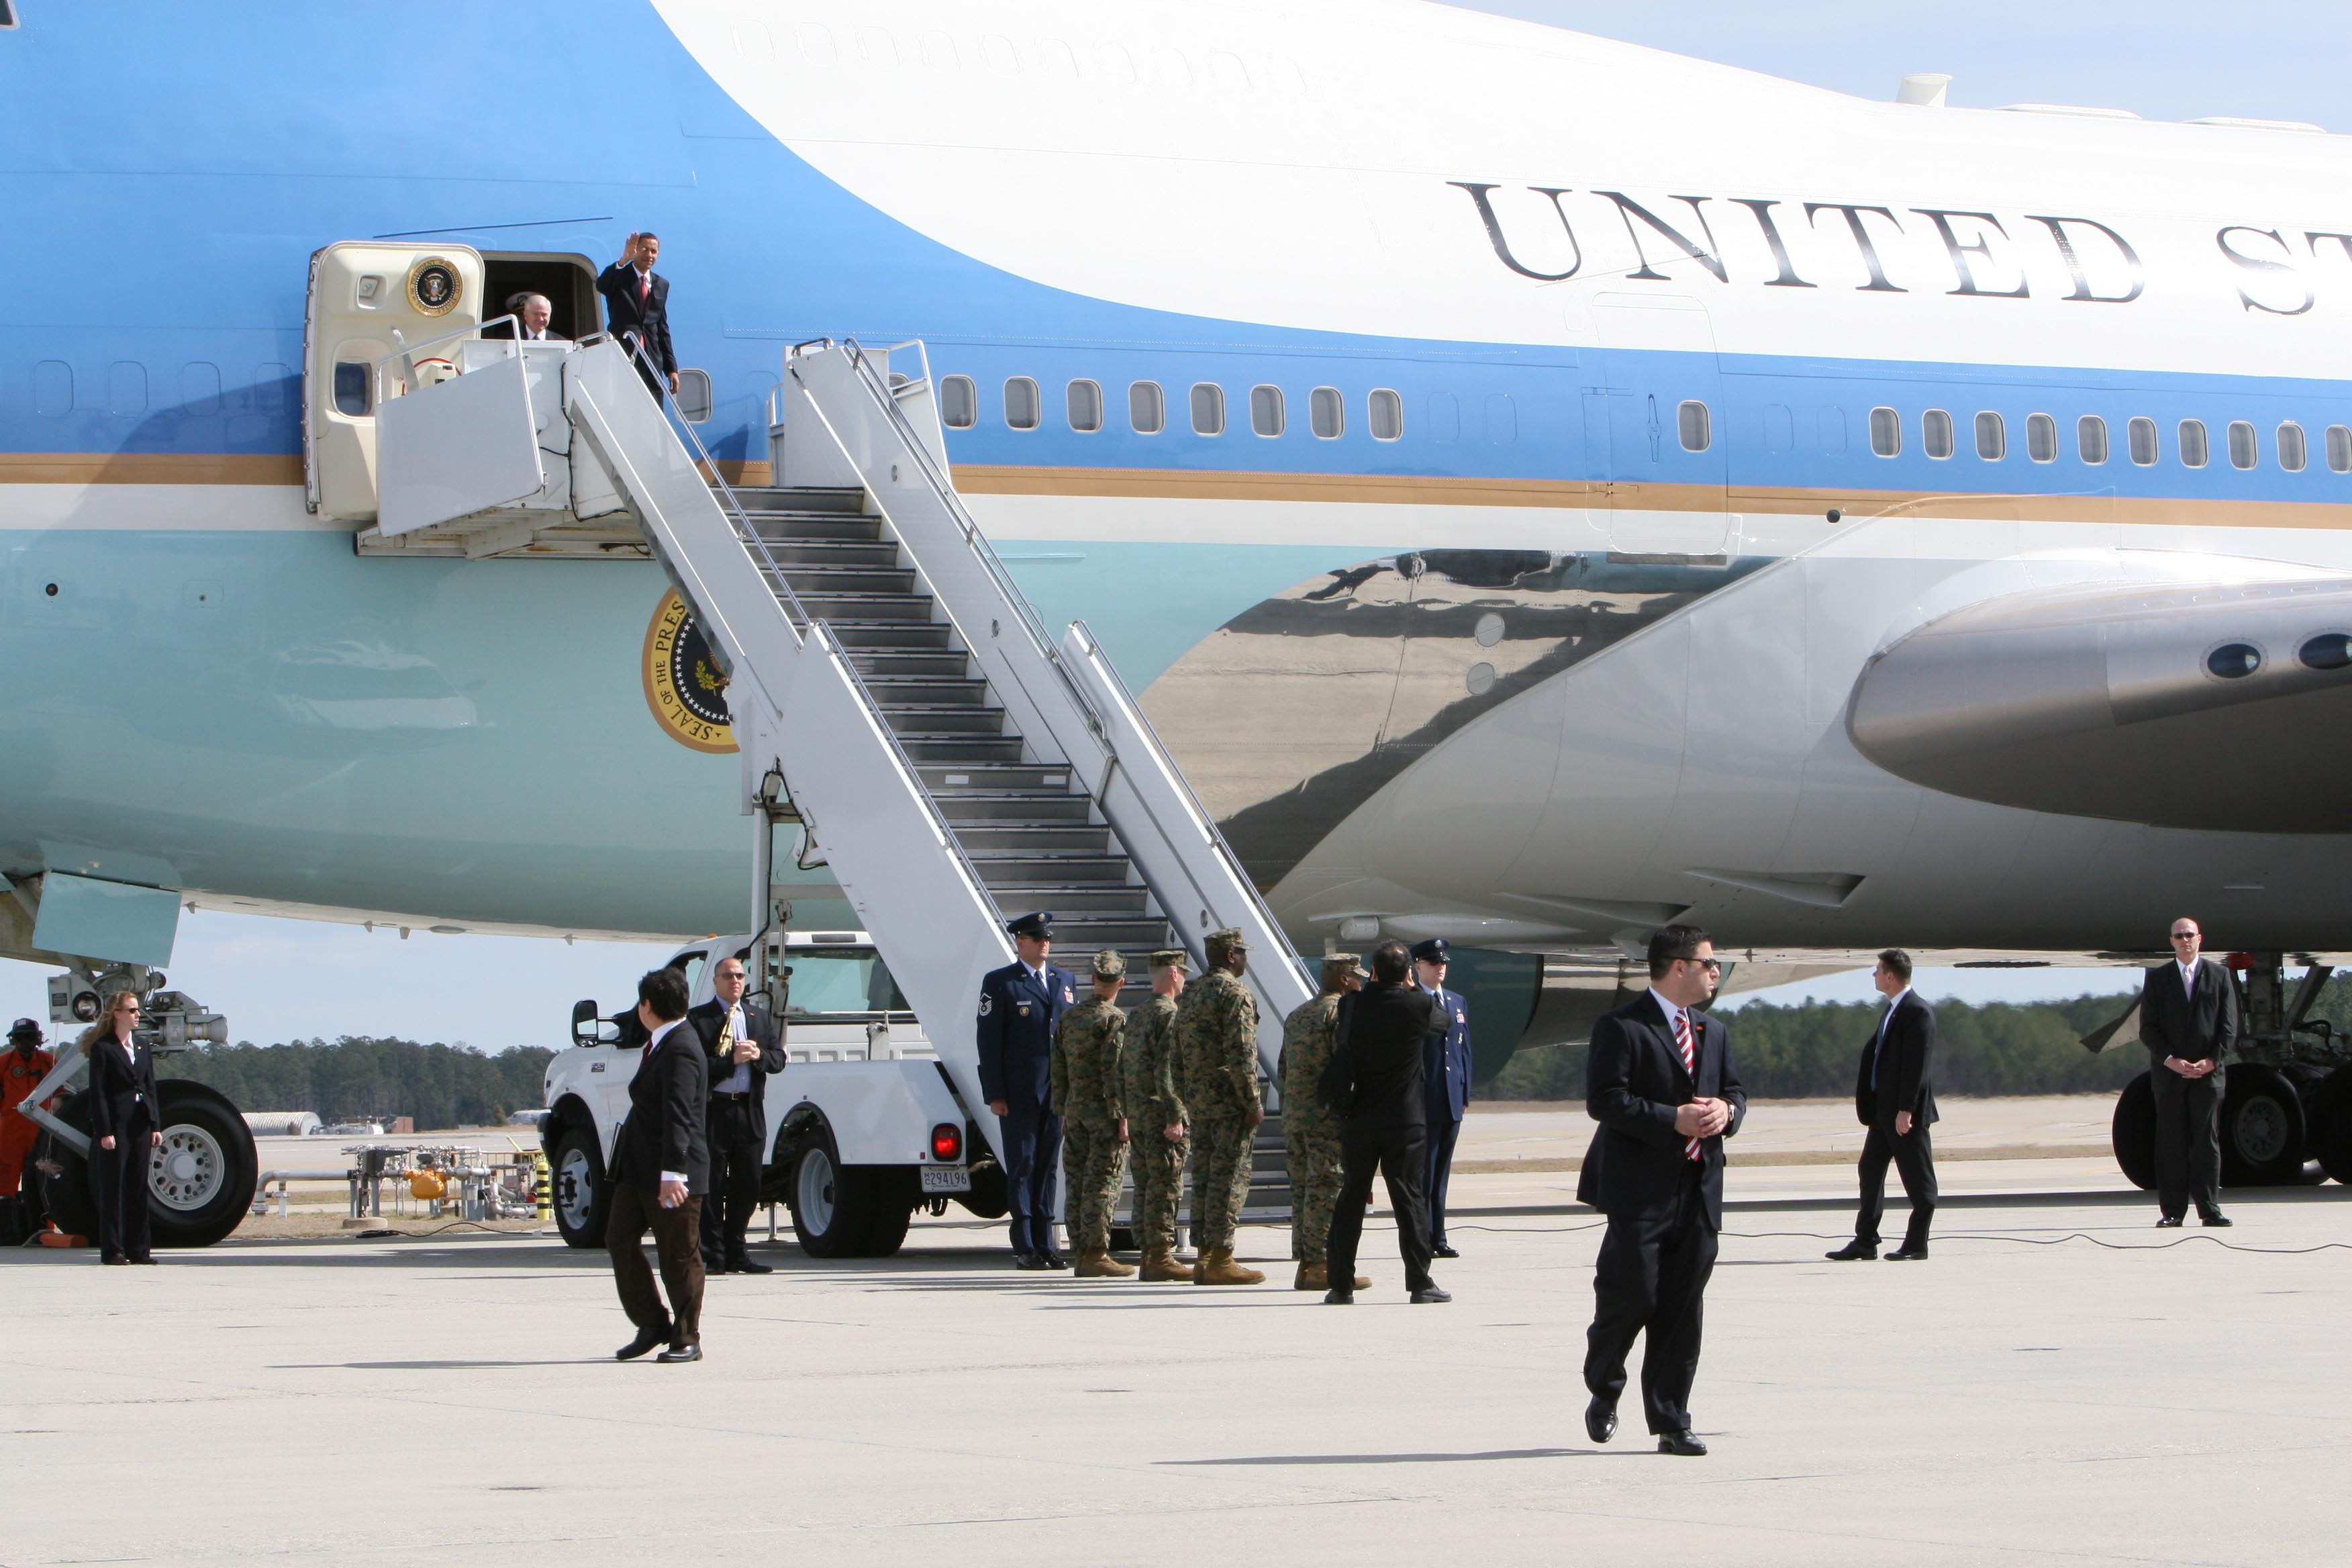 Stock Photo Of President Barack Obama Disembarking Air Force One